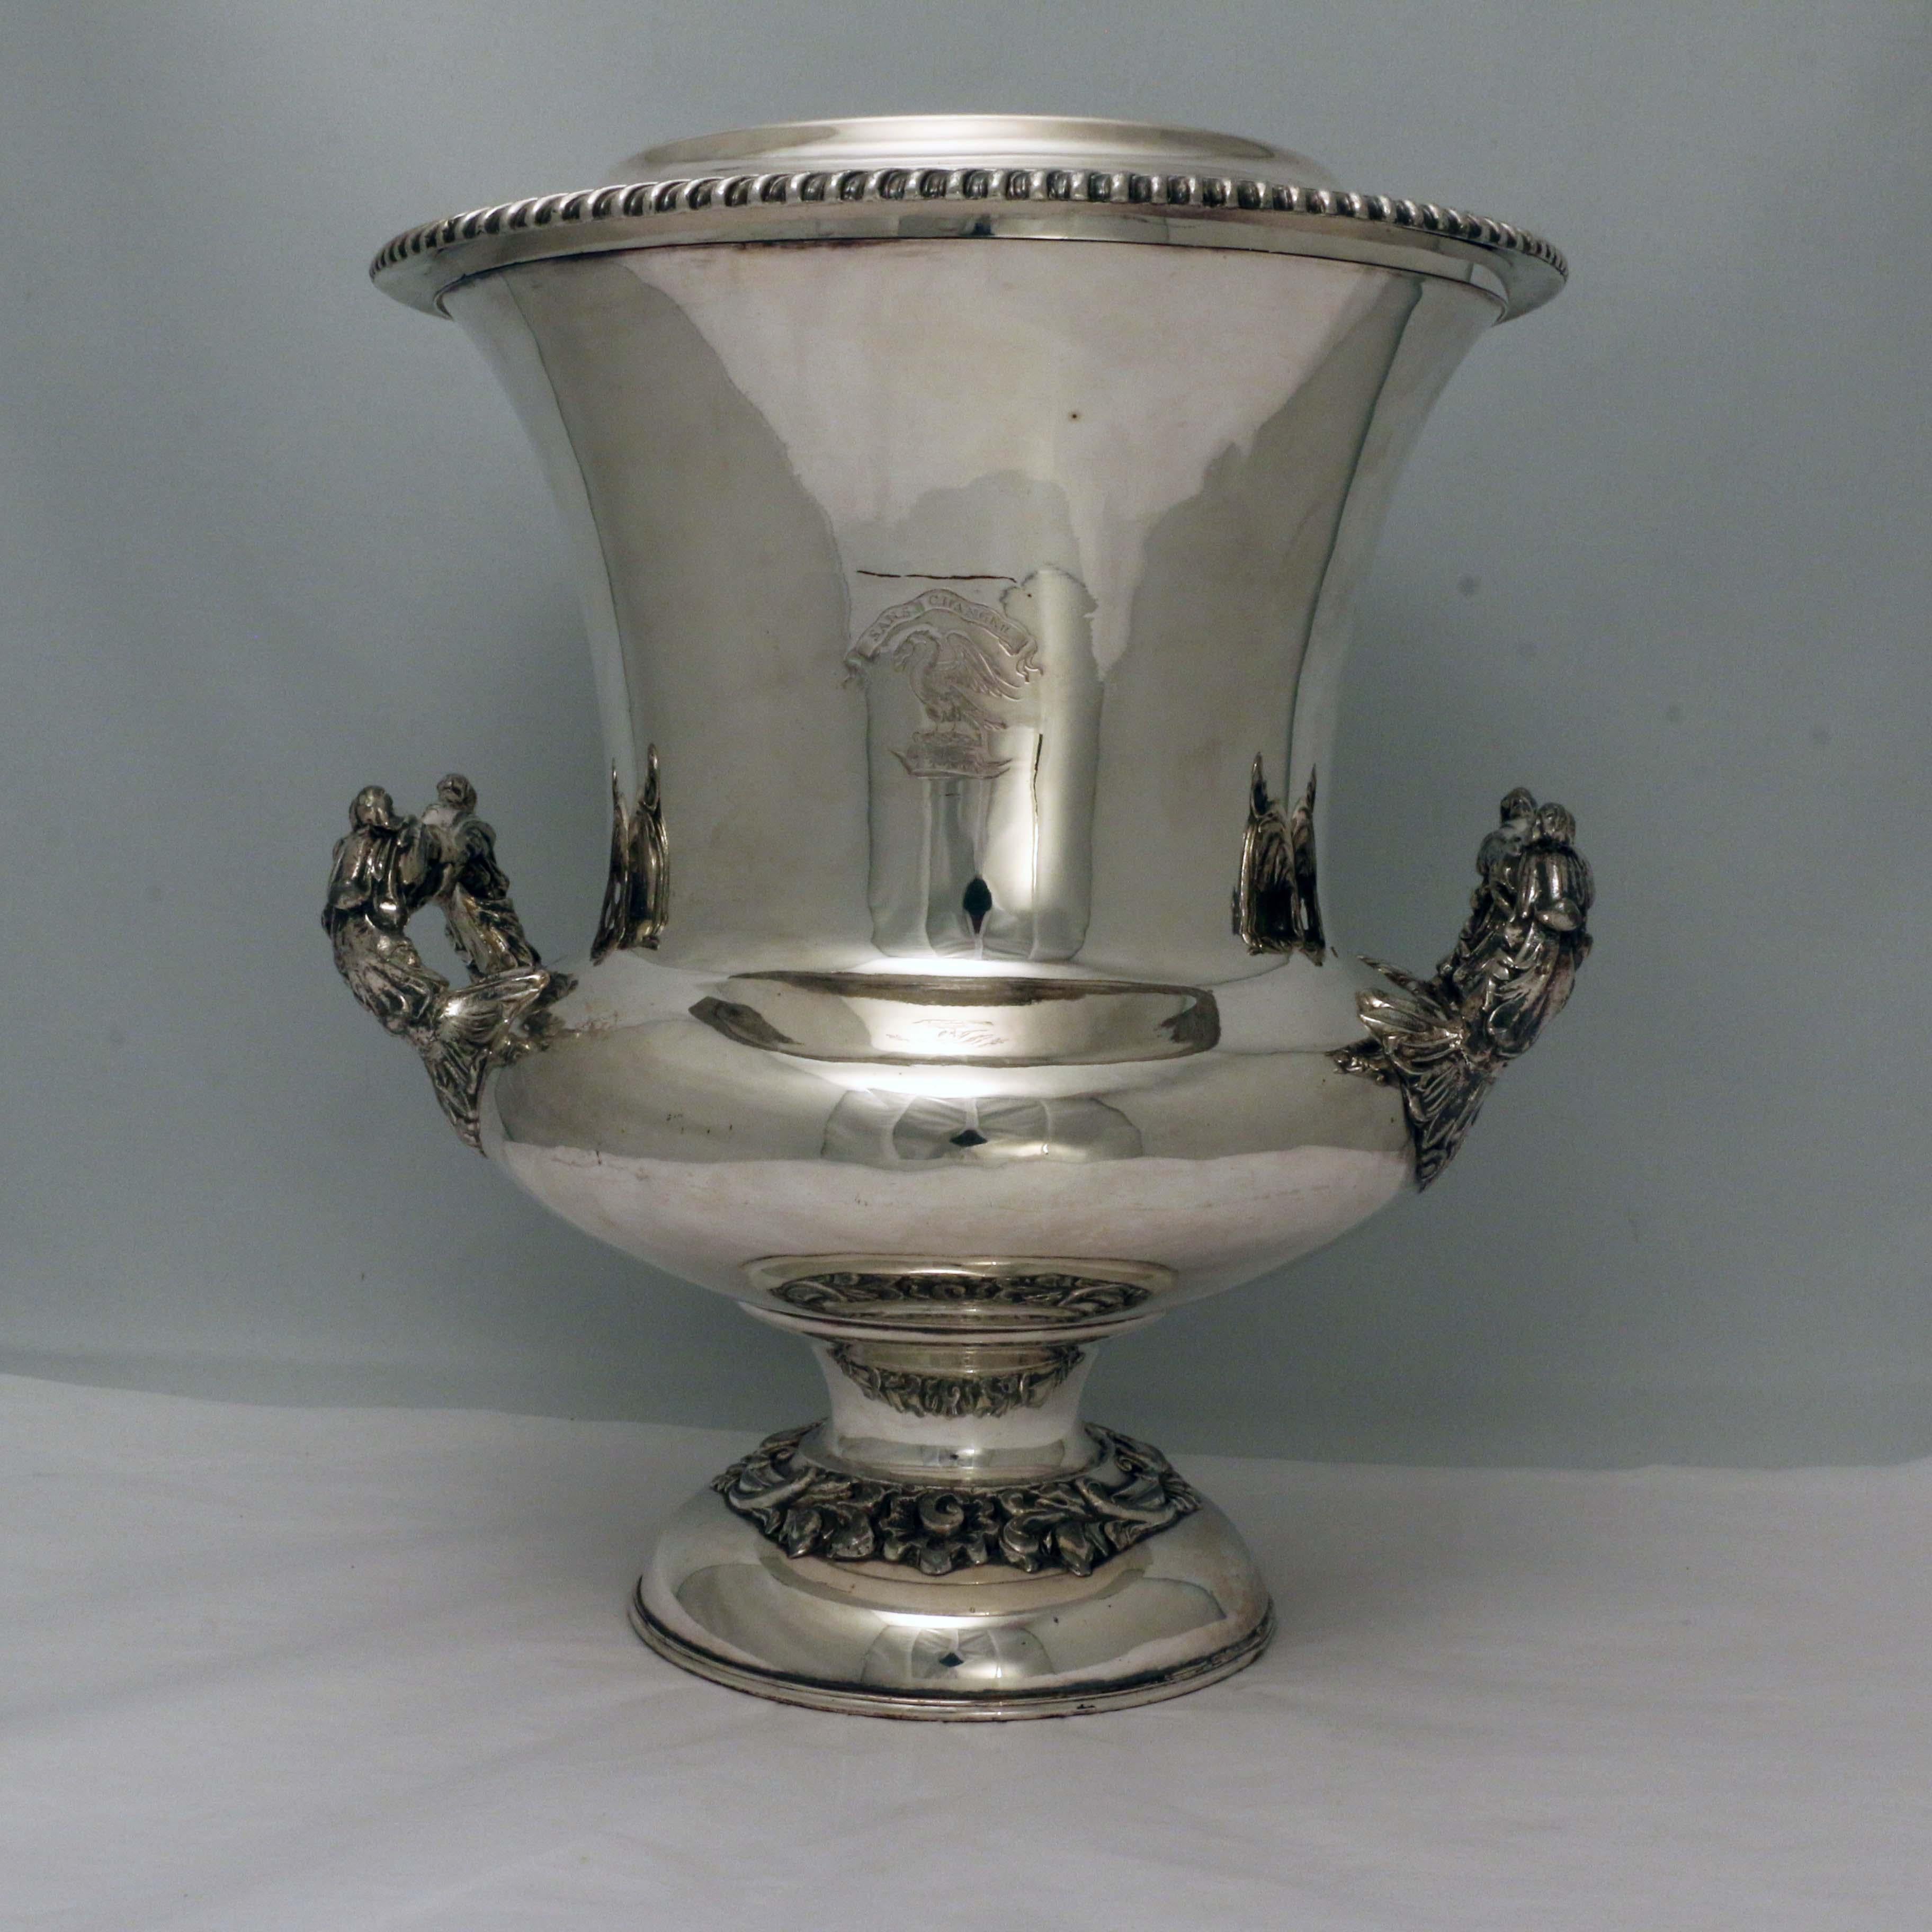 A very hansome pair of Antique Georgian Old Sheffield silver plated wine coolers in the Campana style, with applied garoon borders, two side-handles with anthemion leaf mounts, with original interiors and covers, and all sitting on pedestal feet.